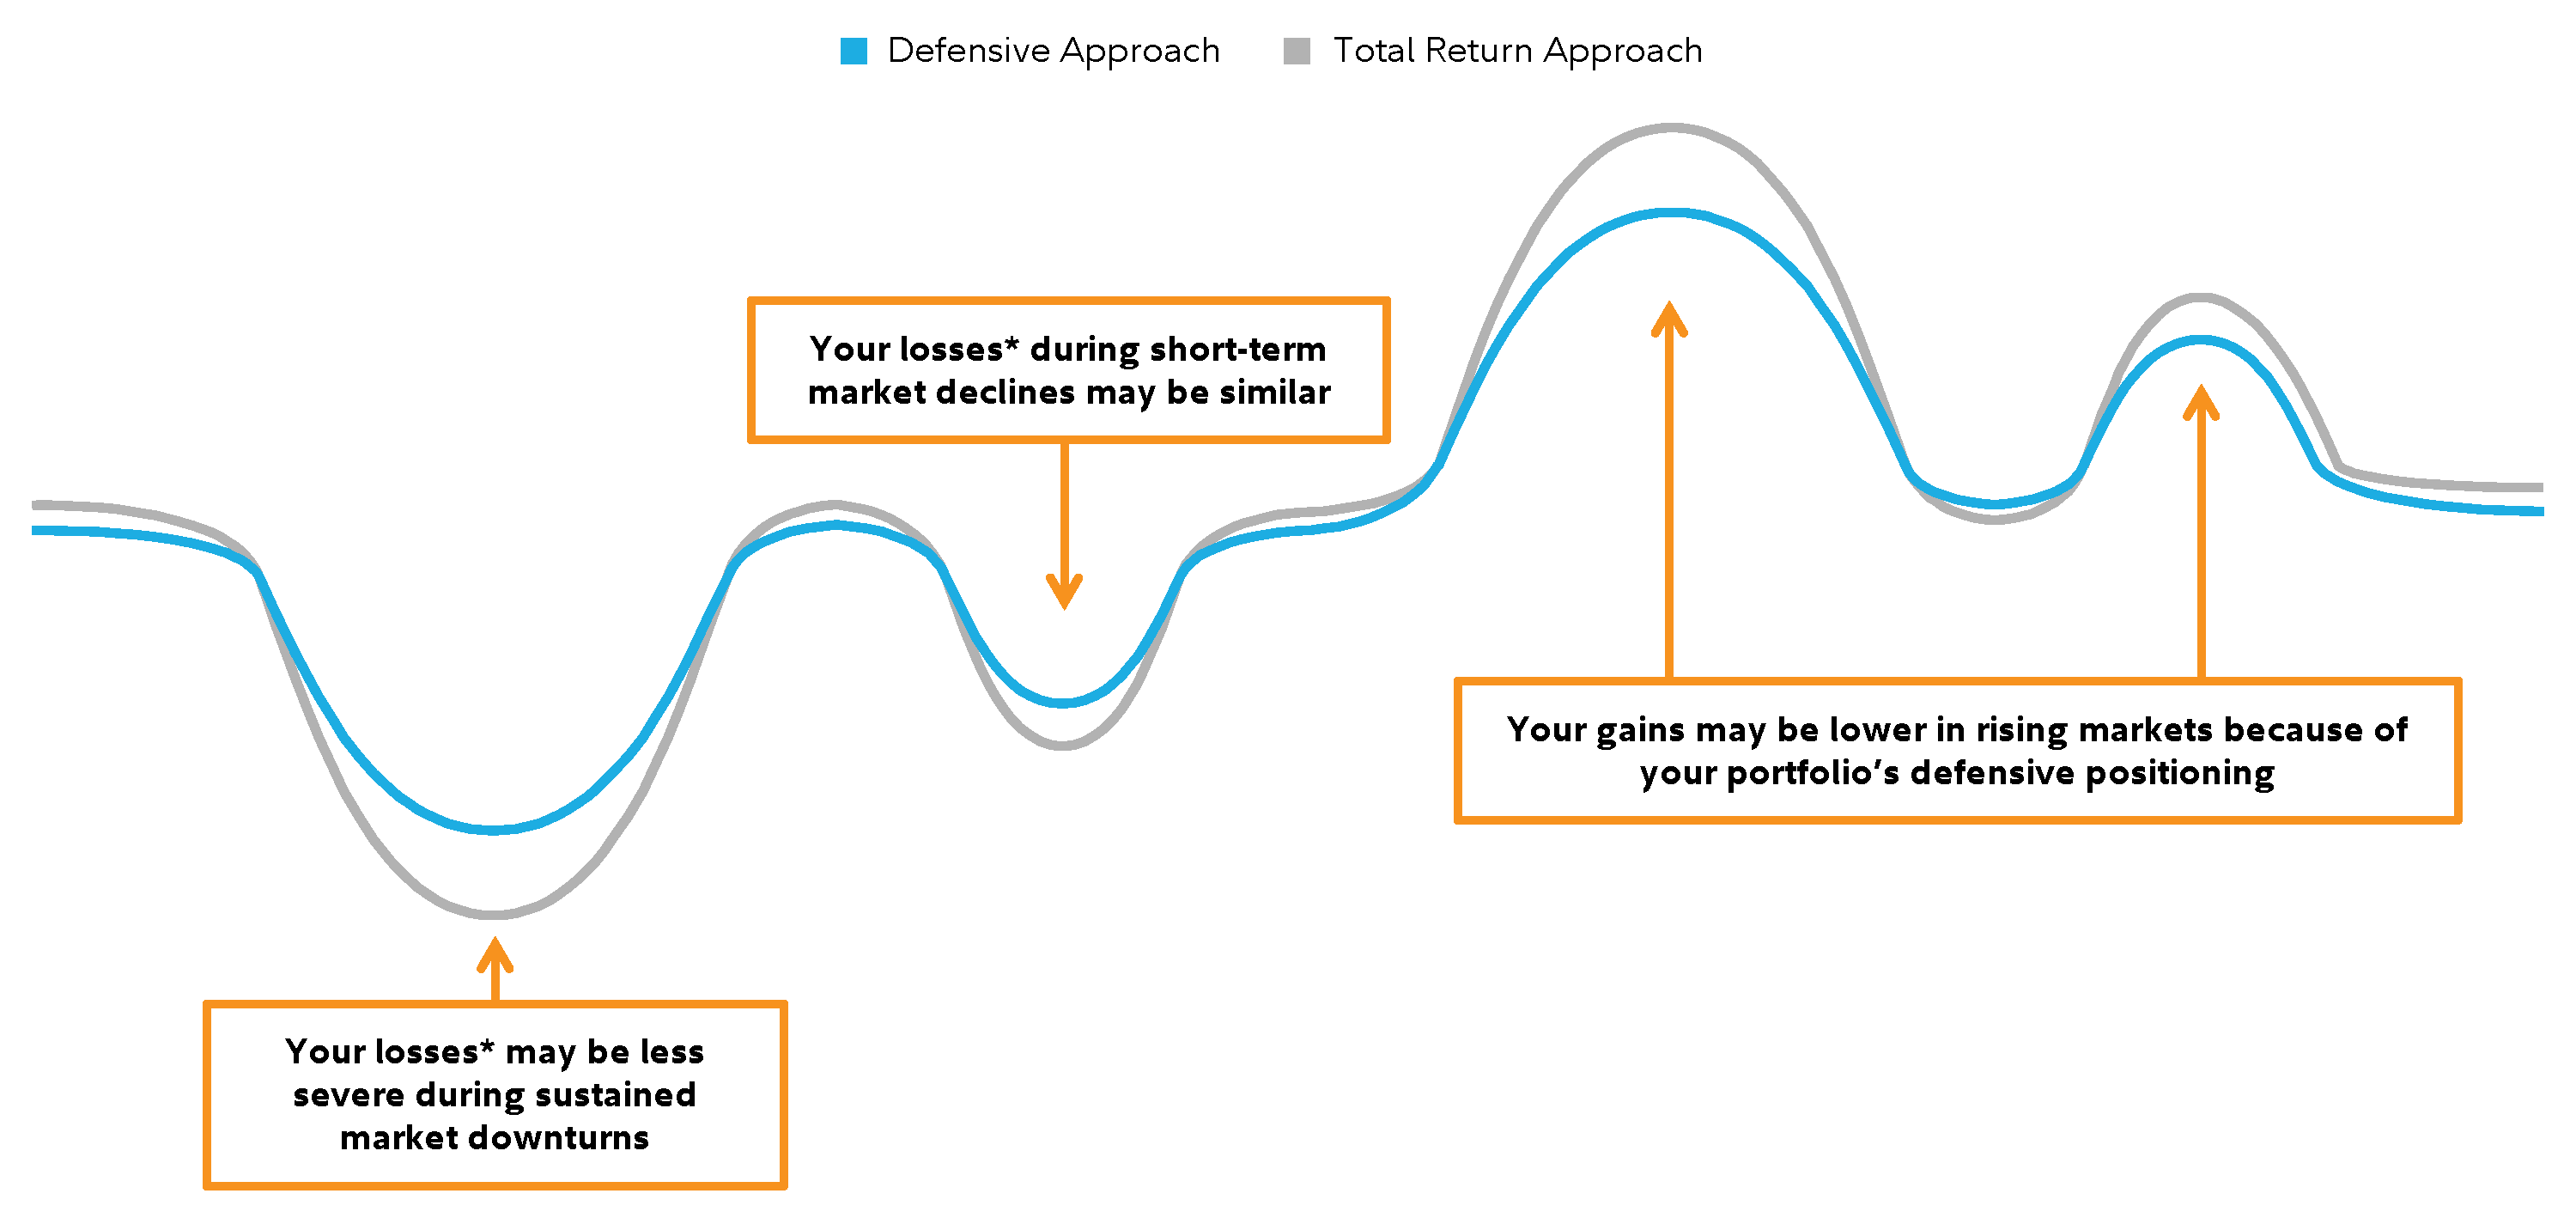 Line graph shows the hypothetical difference between our Total Return and Defensive approaches. During sustained market corrections, a defensive approach may experience losses that are less severe than a total return approach. However, during short-term market declines losses for the two approaches may be similar. During periods where equities are strong, gains in a defensive approach may be lower than in a total return approach, due to your account's defensive positioning.